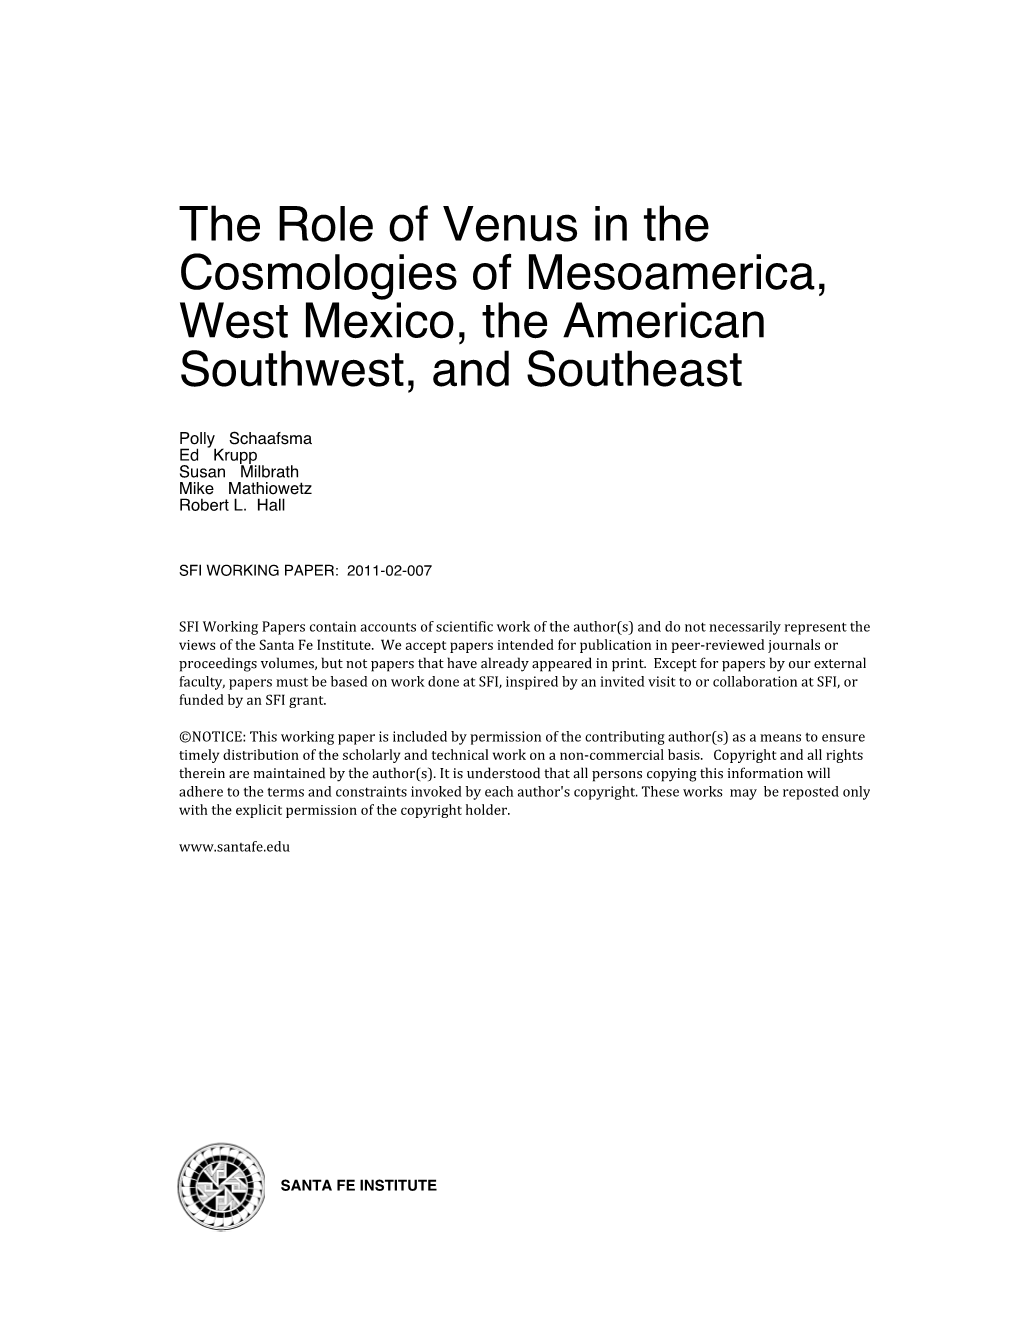 White Paper: the Role of Venus in the Cosmologies of Mesoamerica, West Mexico, the American Southwest, and Southeast